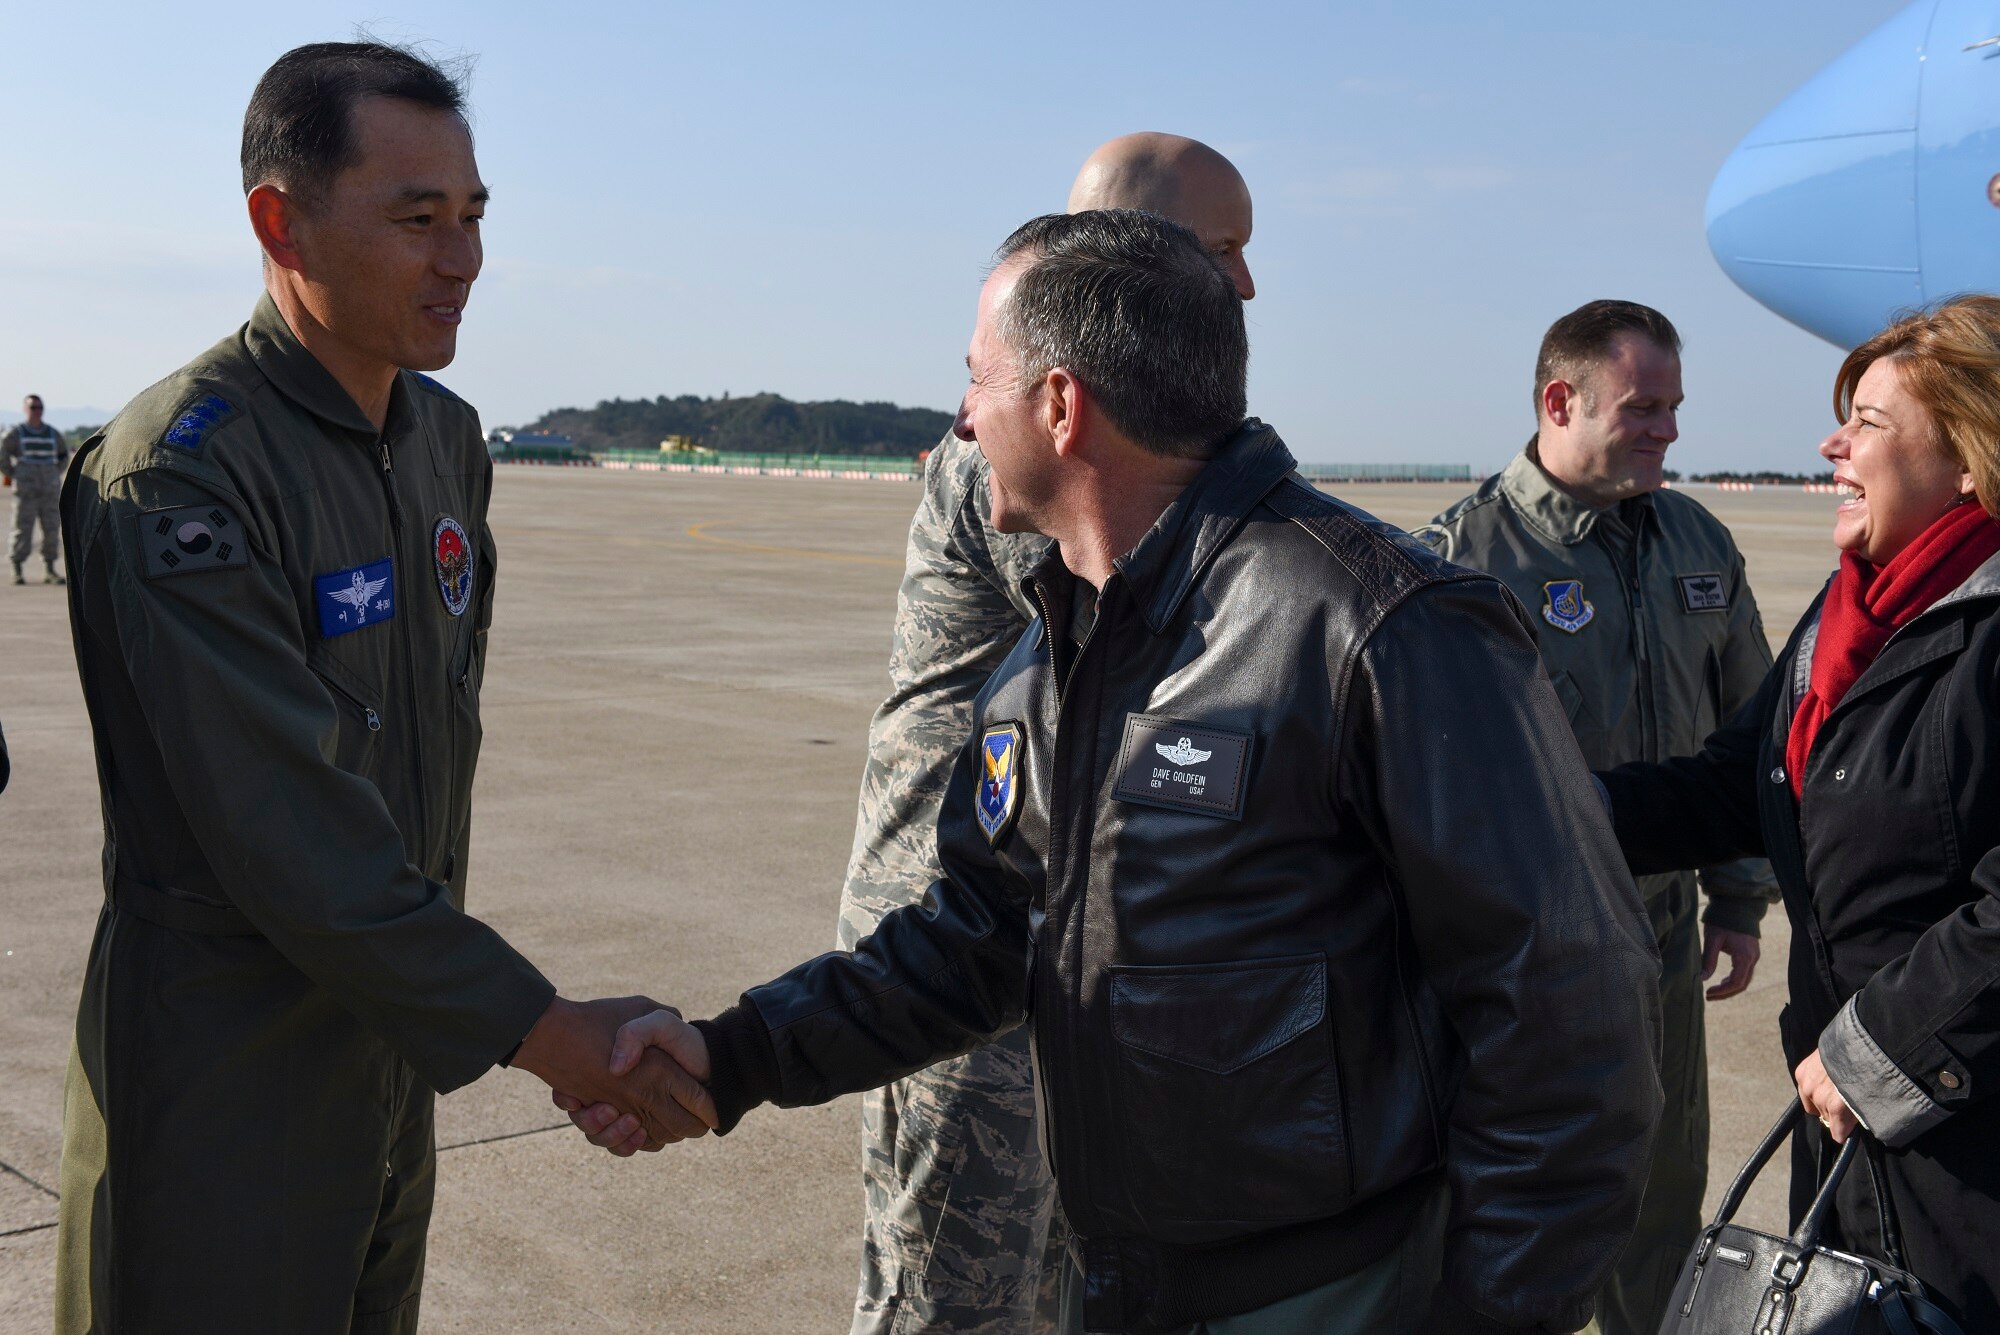 Col. Sung-Bok Lee, 38th Fighter Group commander, greets Air Force Chief of Staff, Gen. David L. Goldfein, at Kunsan Air Base, Republic of Korea, Nov. 2, 2016. Goldfein traveled to Kunsan to meet with airmen and discuss his focus areas as Air Force Chief of Staff as well as the Air Force mission throughout the Pacific region.  (U.S. Air Force photo by Senior Airman Michael Hunsaker/Released)